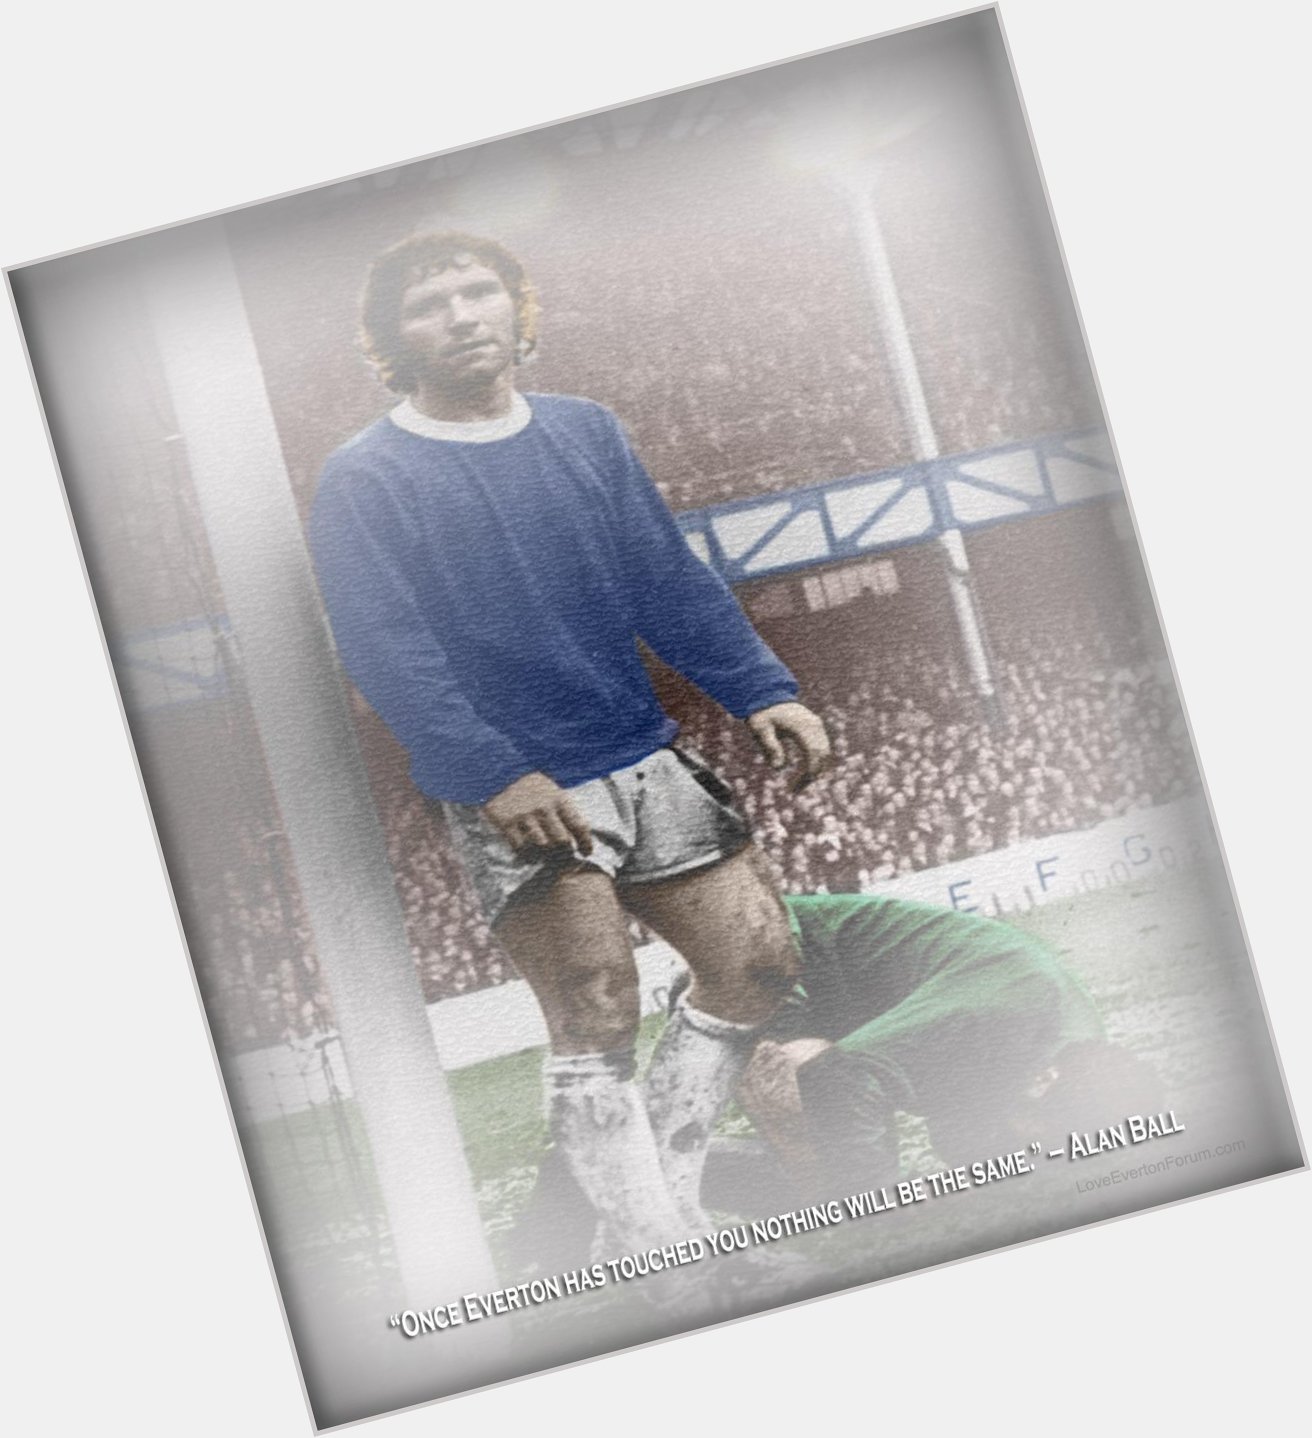 Happy 70th birthday to Everton legend Alan Ball - Alive & well in our hearts.     